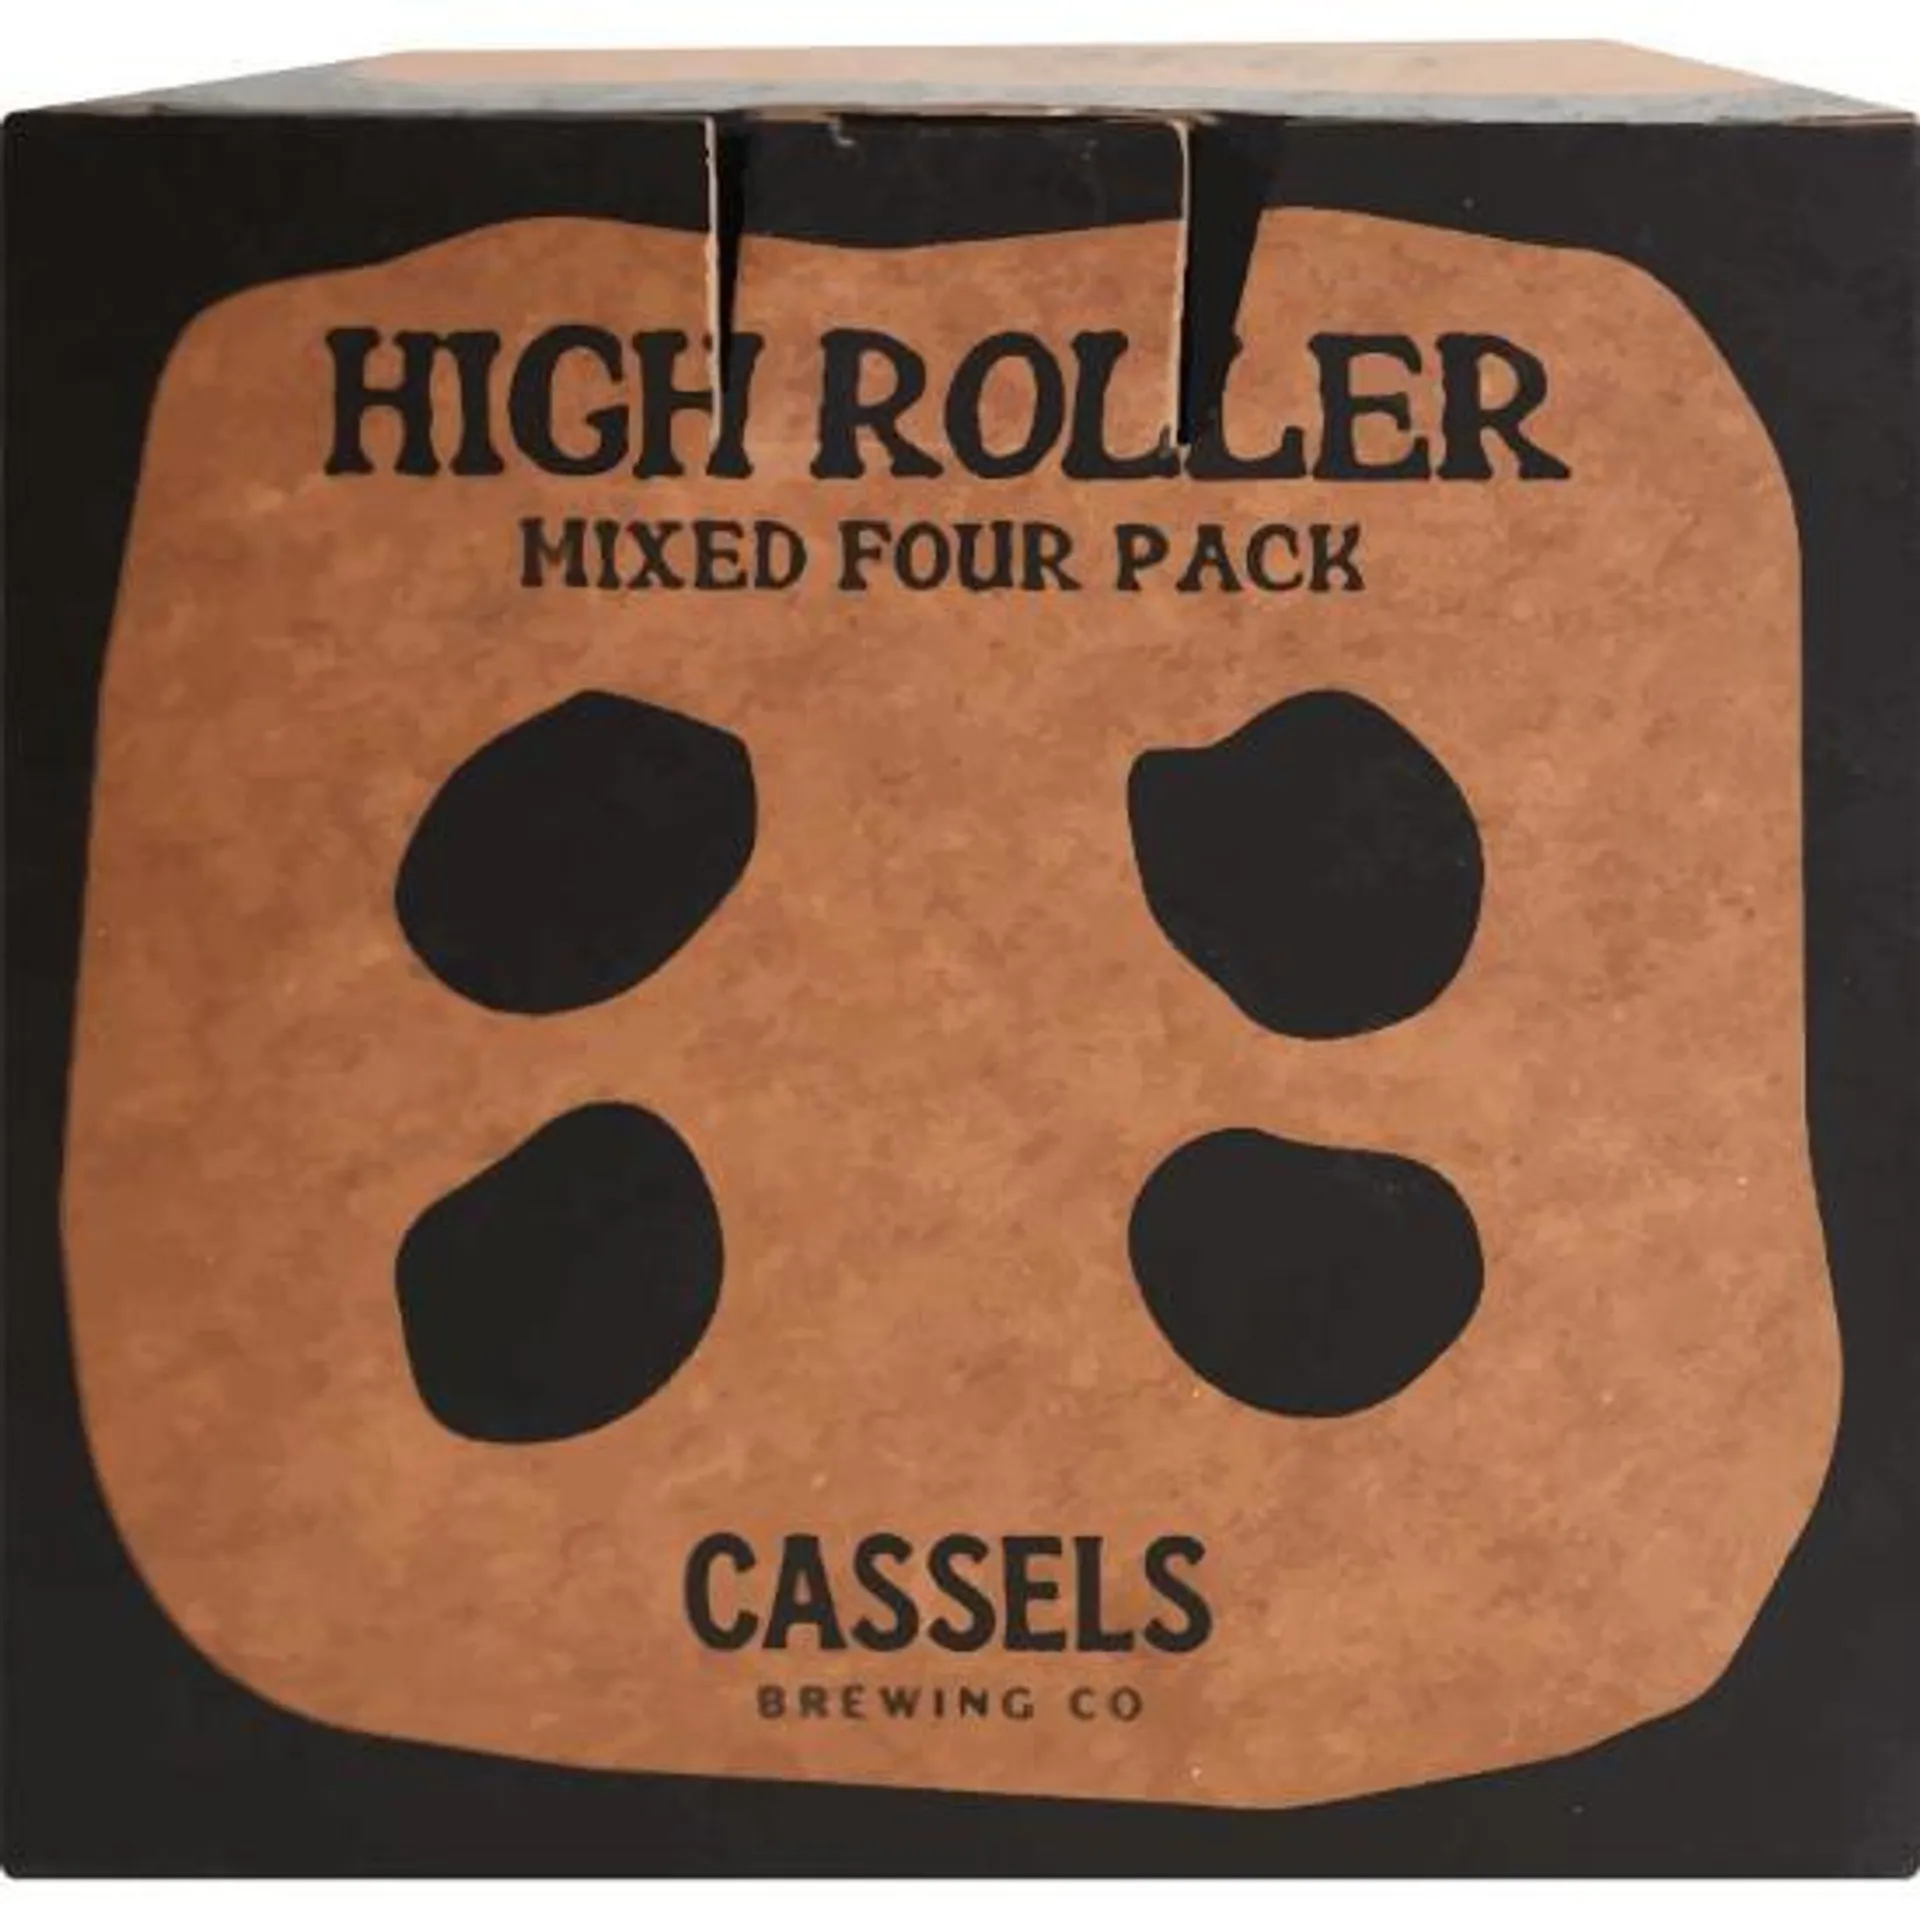 Cassels High Roller Mixed Four Pack Cans 4x330ml